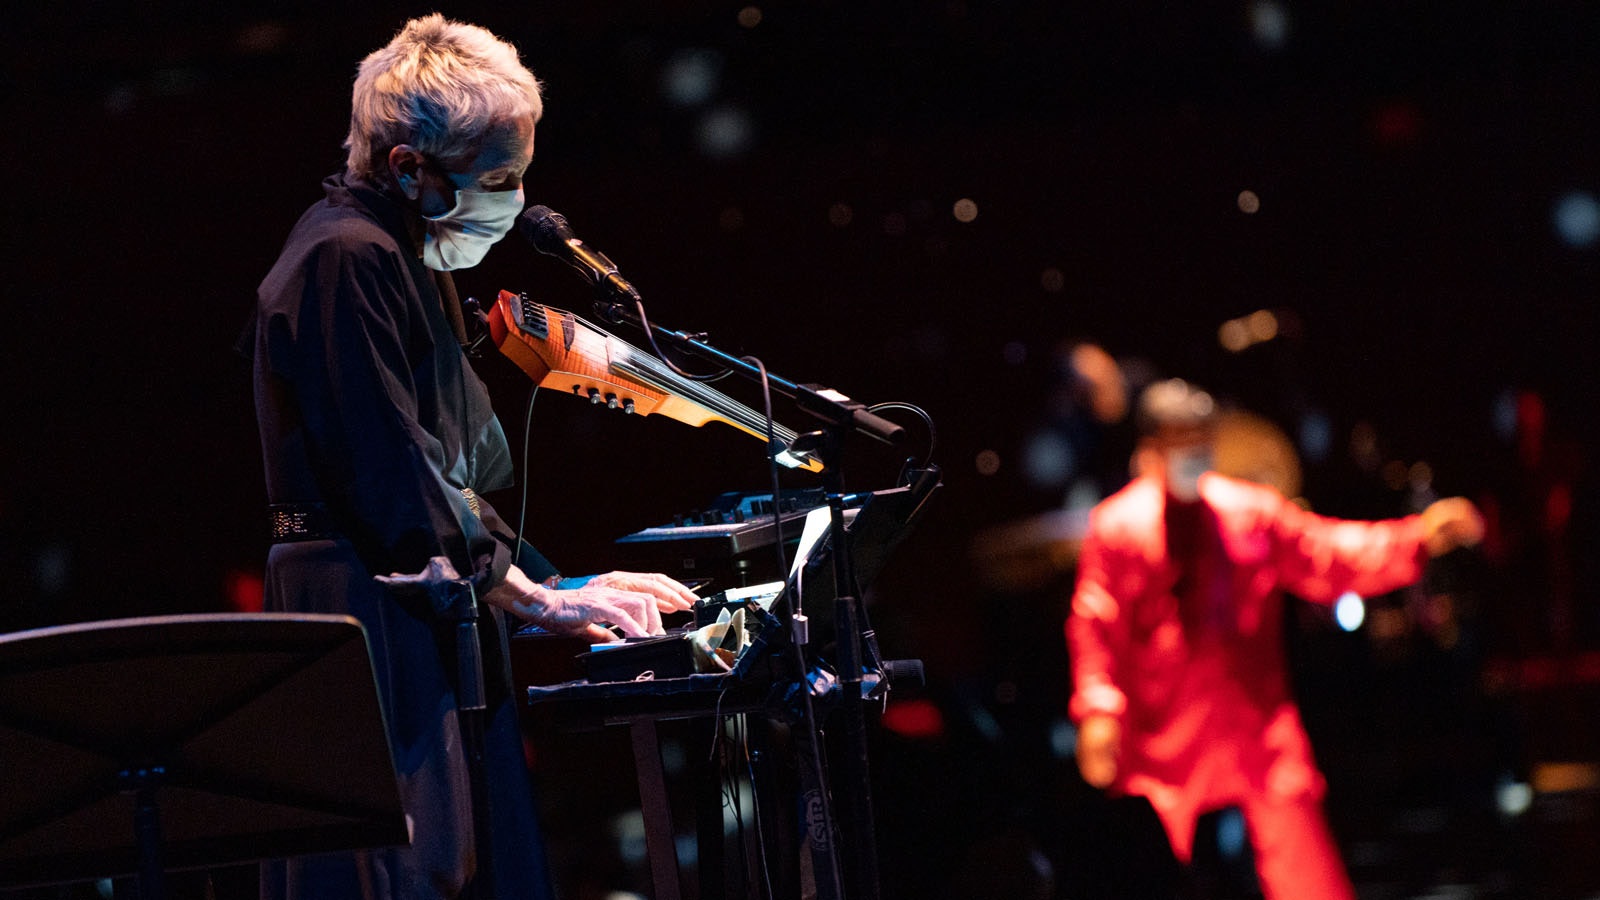 Laurie
Anderson
in
Party in the Bardo
at
Park Avenue Armory’s Drill Hall,
2021.
Photo credit: Stephanie Berger
Photography
/Park Avenue Armory